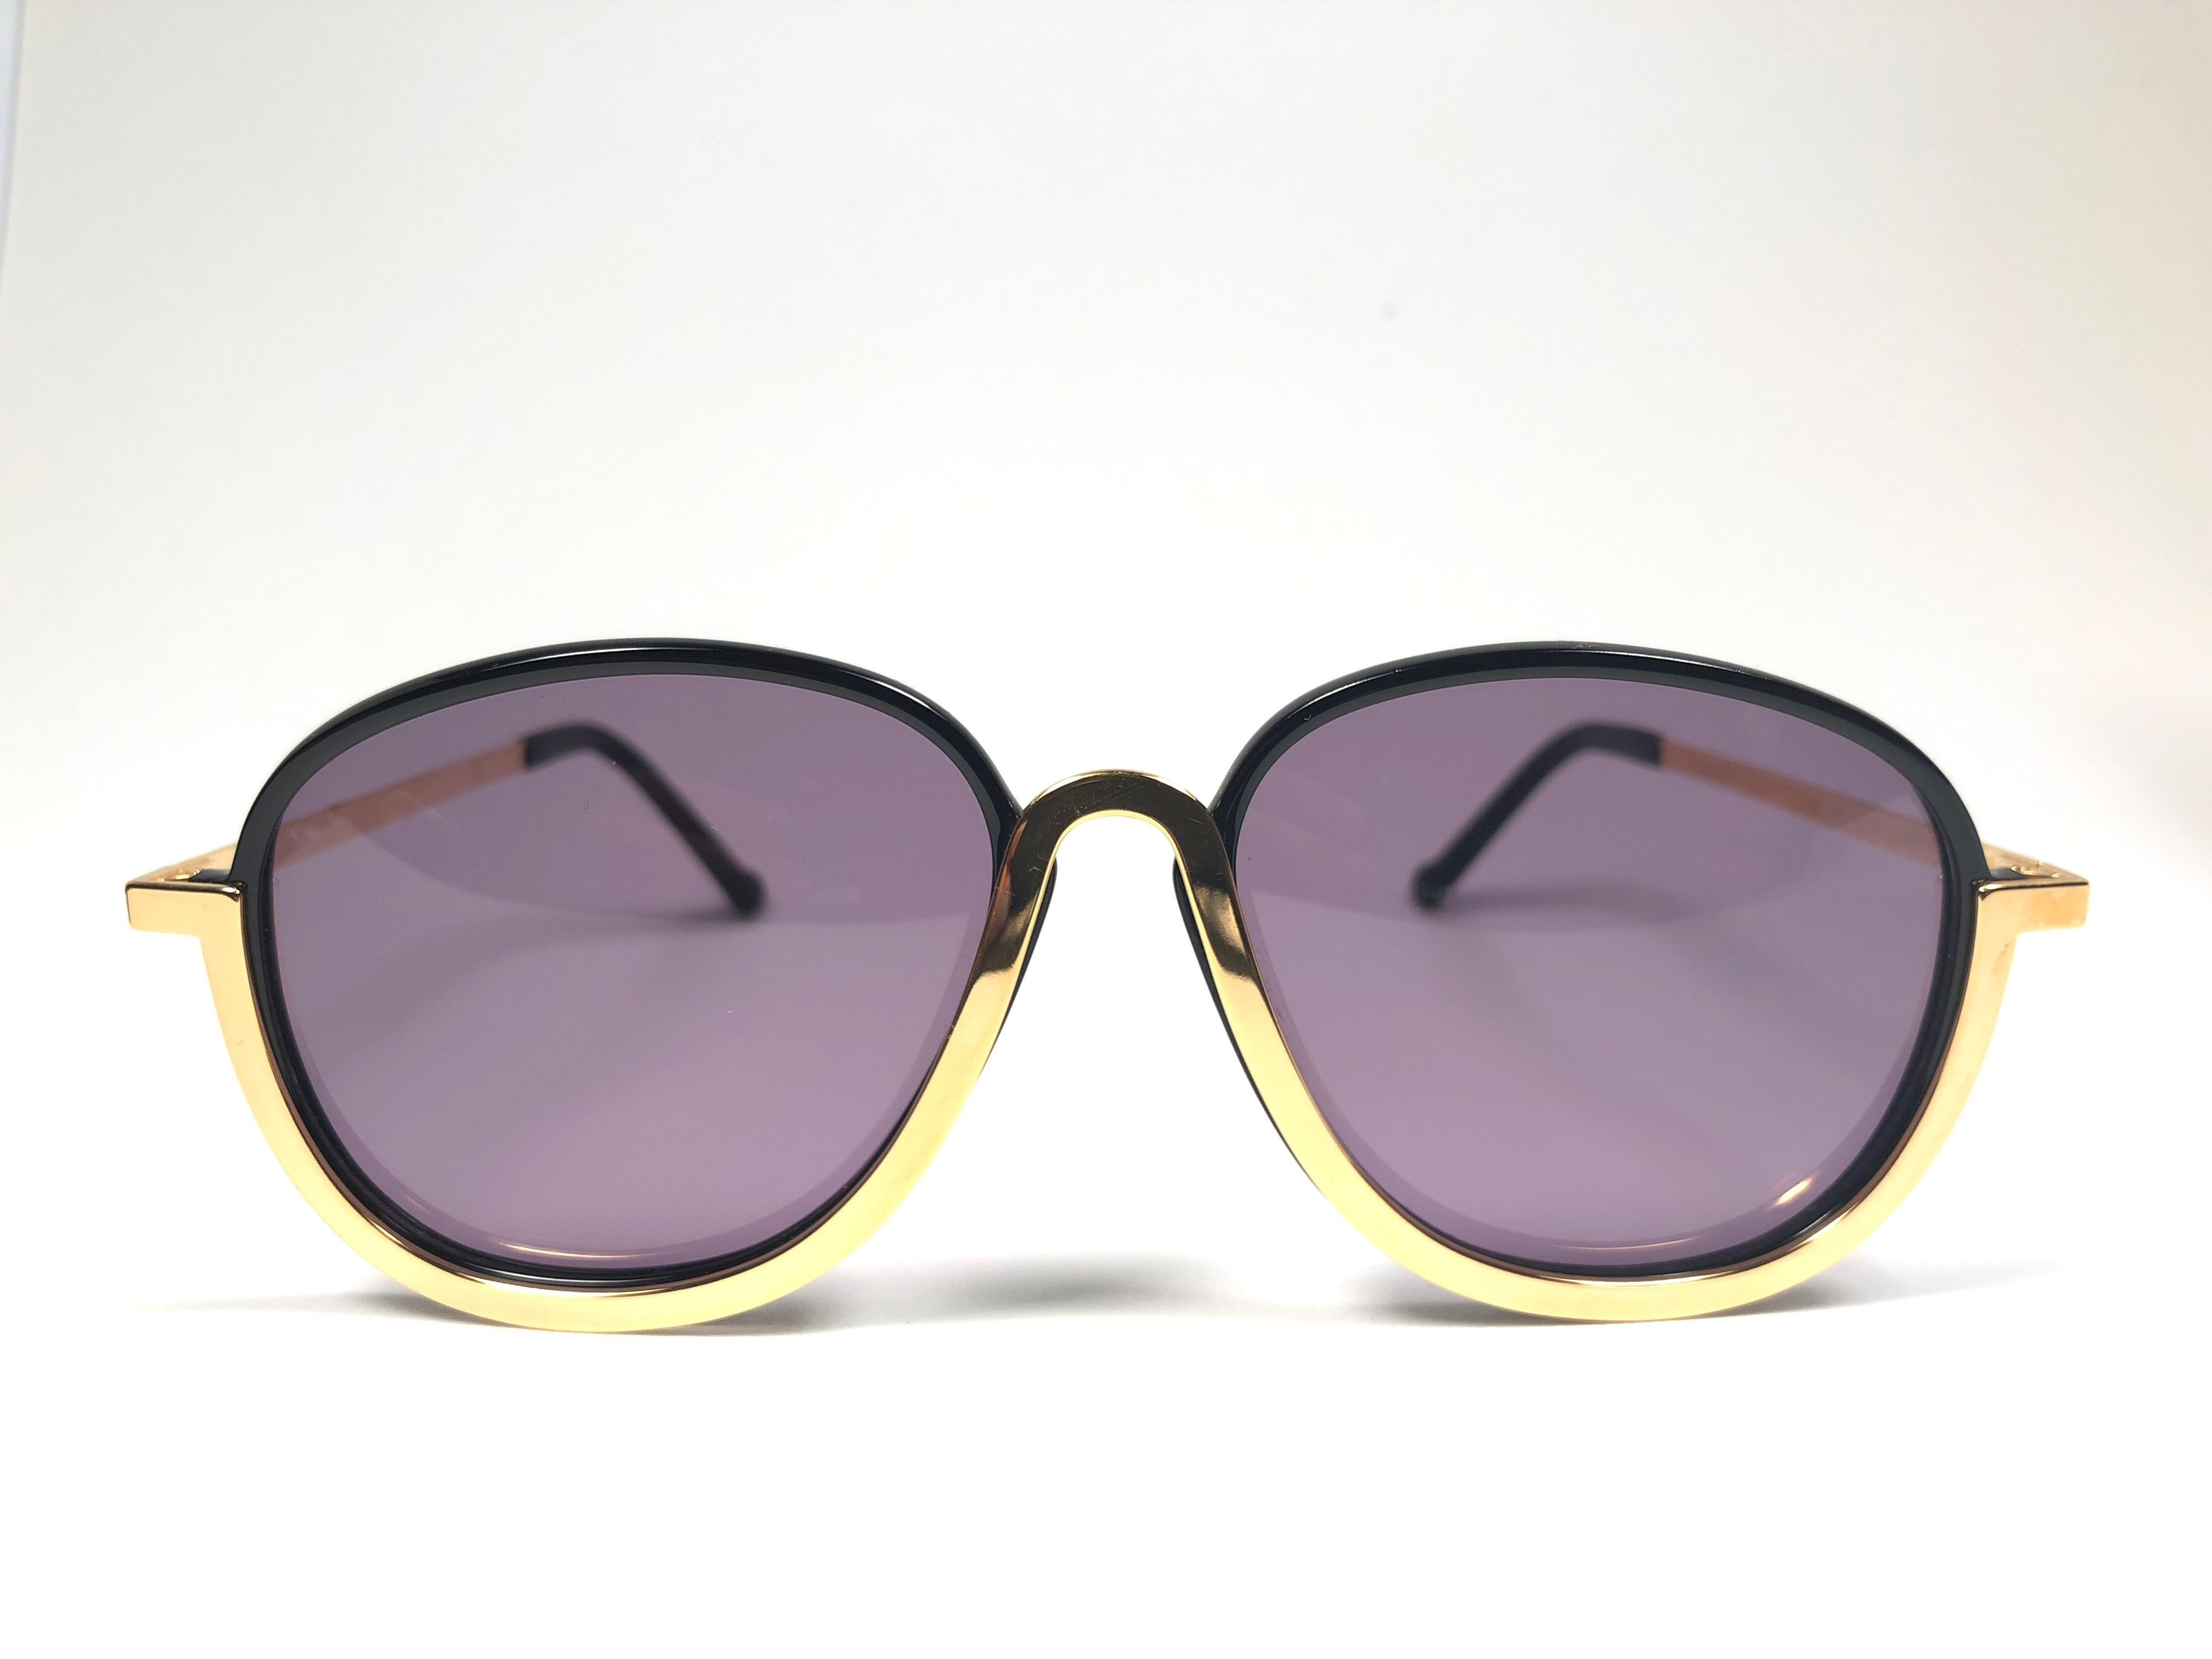 Superb & rare pair of New vintage Christian Lacroix sunglasses.   

Black with delicate gold accents frame holding a pair of spotless lenses.  

New, never worn or displayed. Made in France.

This pair may show minor sign pf wear due to storage.